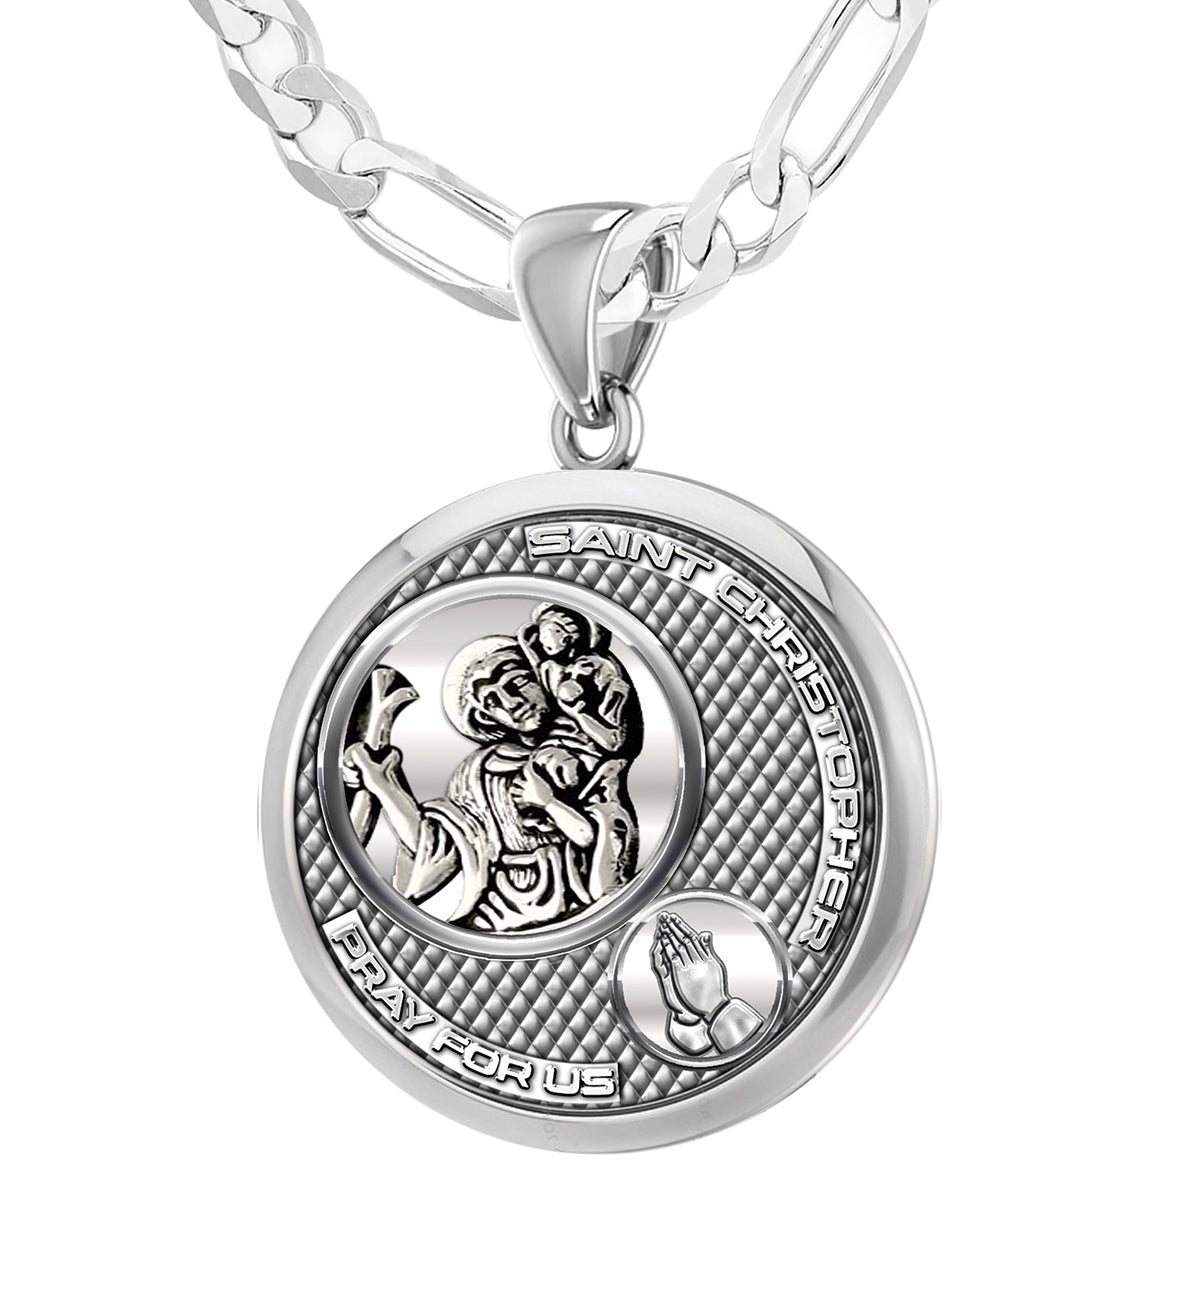 Men's 925 Sterling Silver Round Saint Christopher Round Polished Finish Pendant Necklace, 25mm - US Jewels